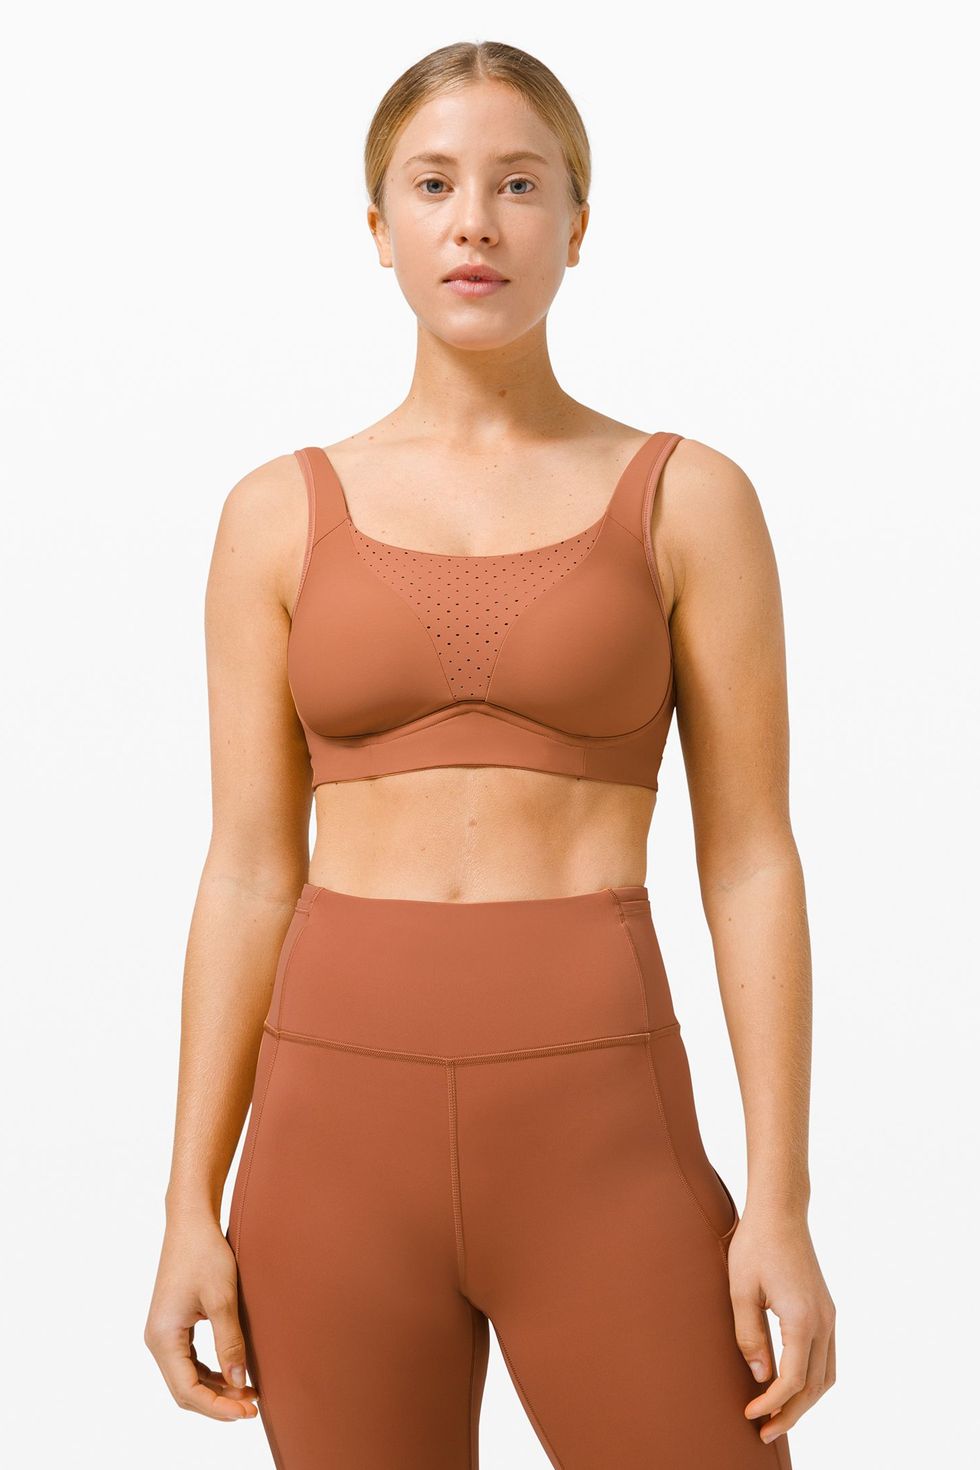 Making Activewear More Accessible for Plus-Size Runners